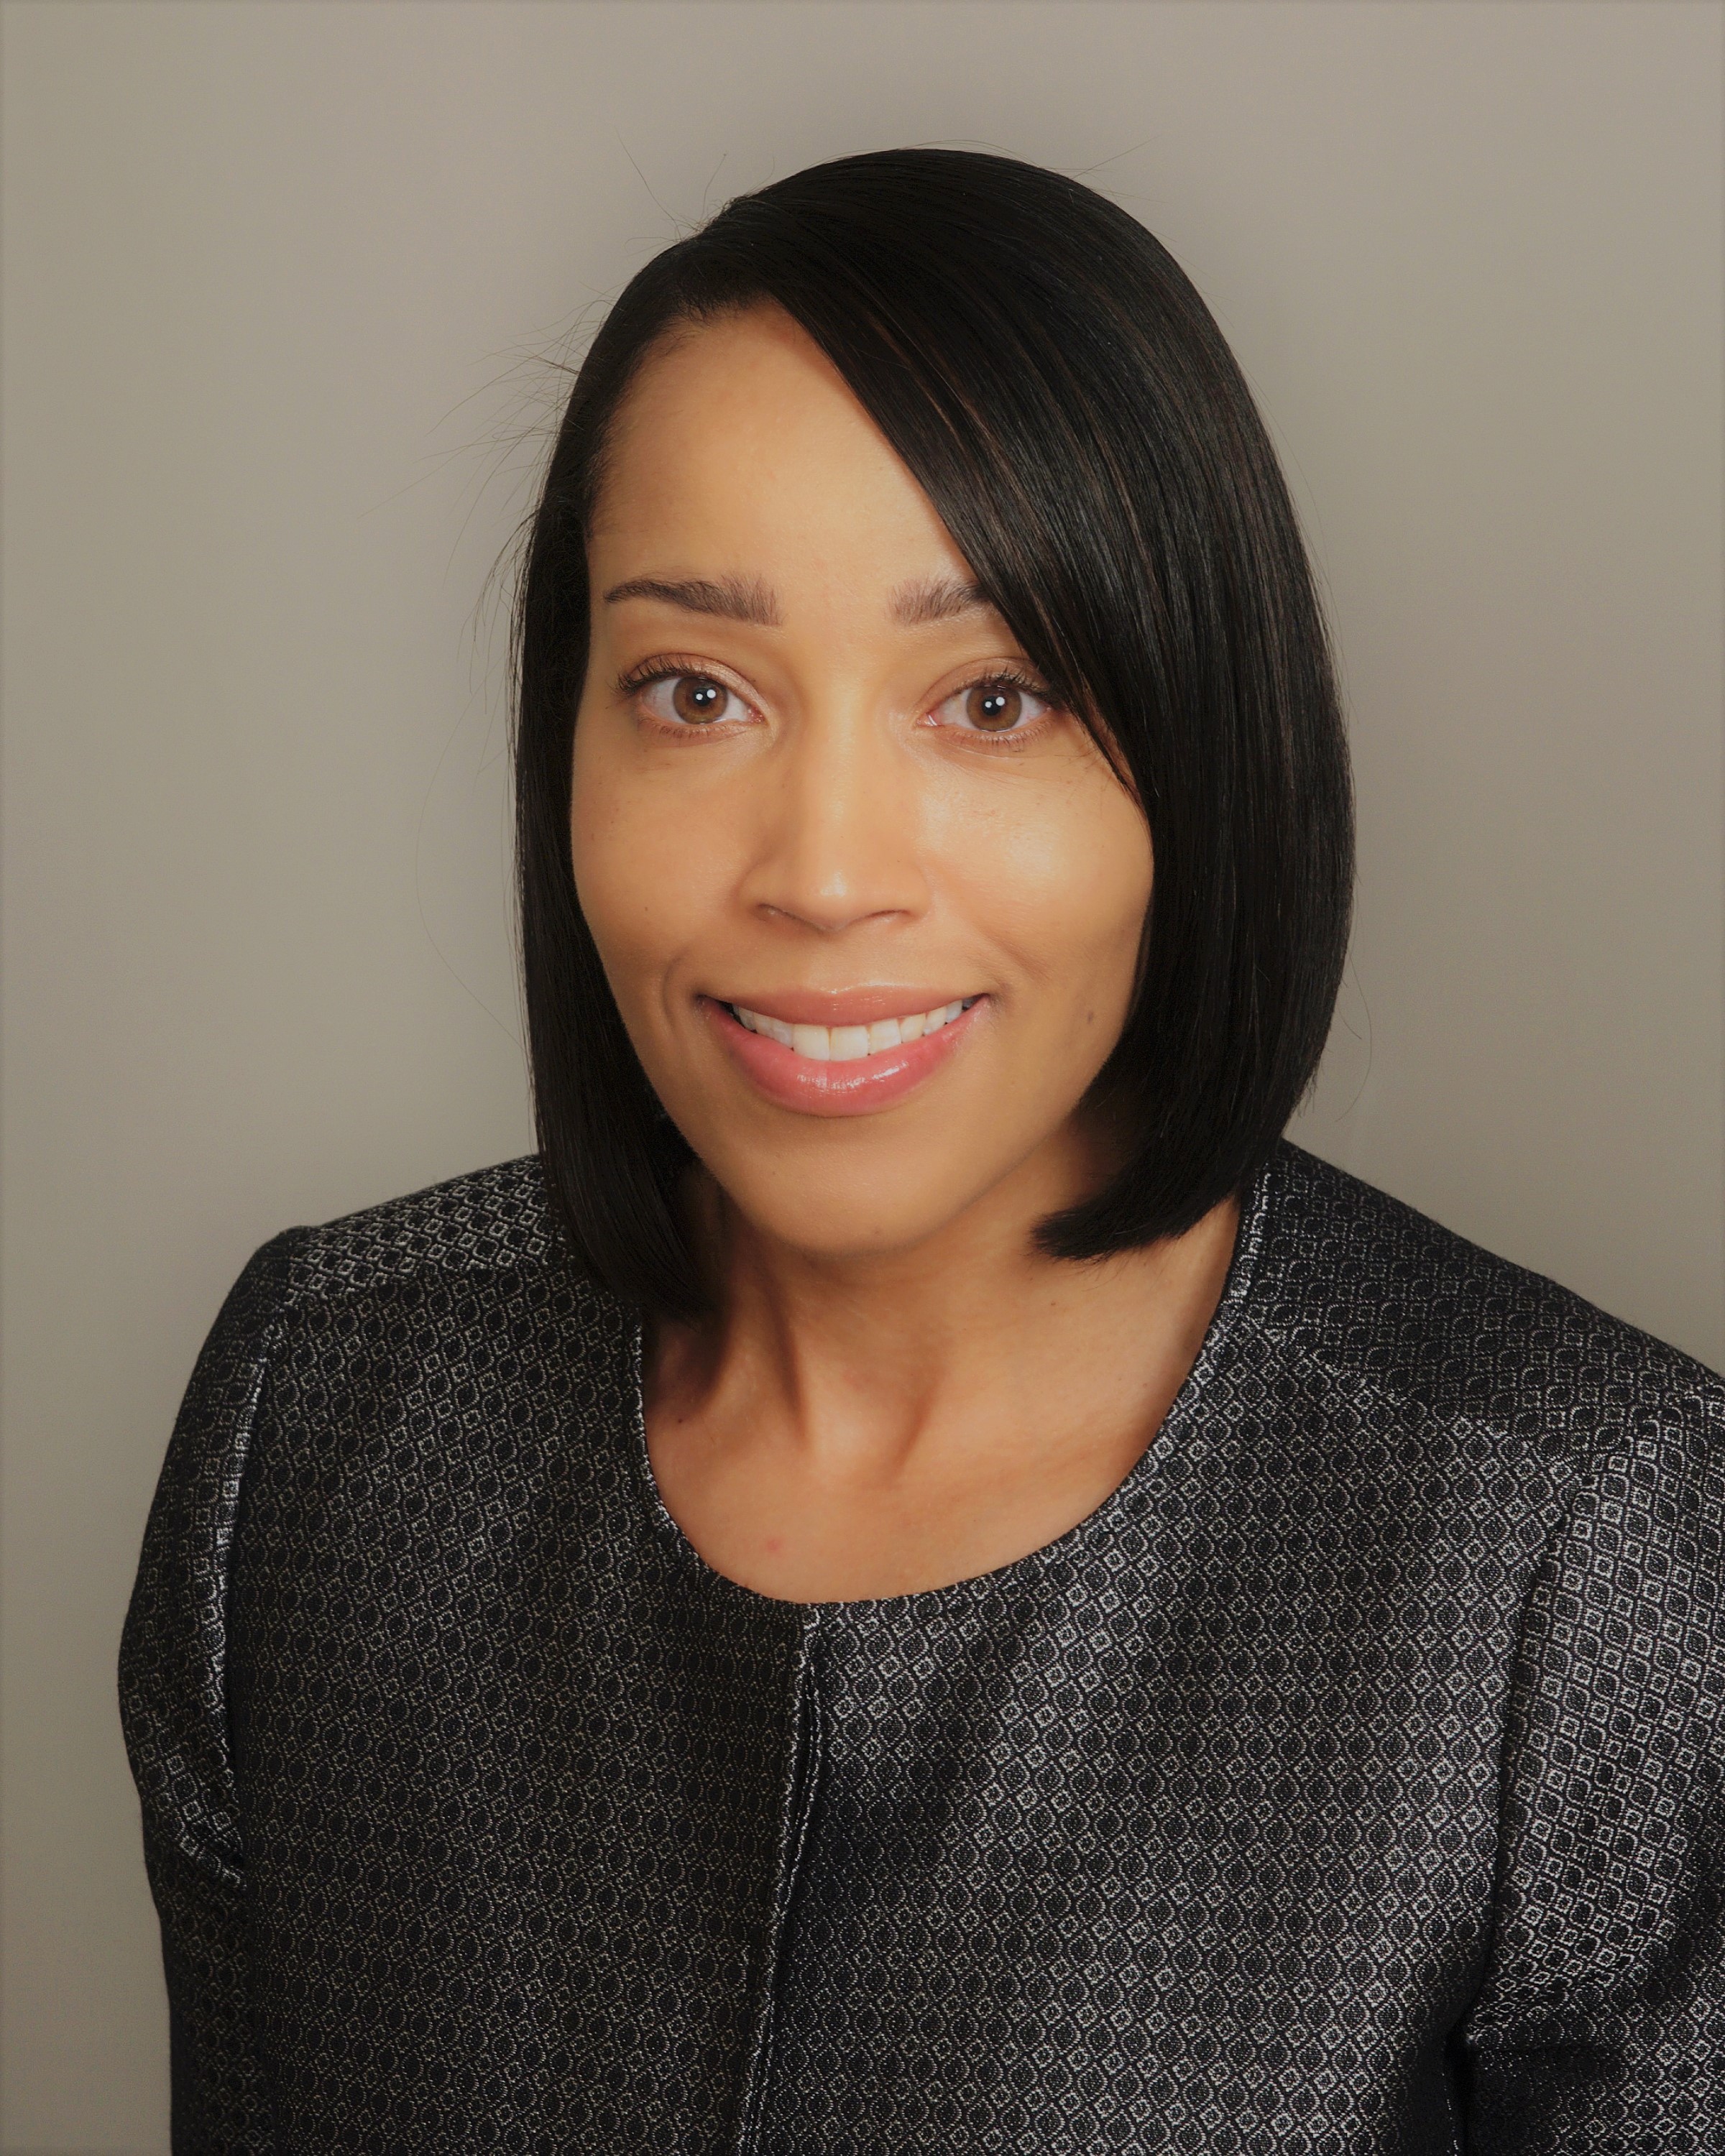 Achieva Announces Appointment of LaToya Warren as Chief Financial Officer and President of Achieva Resource